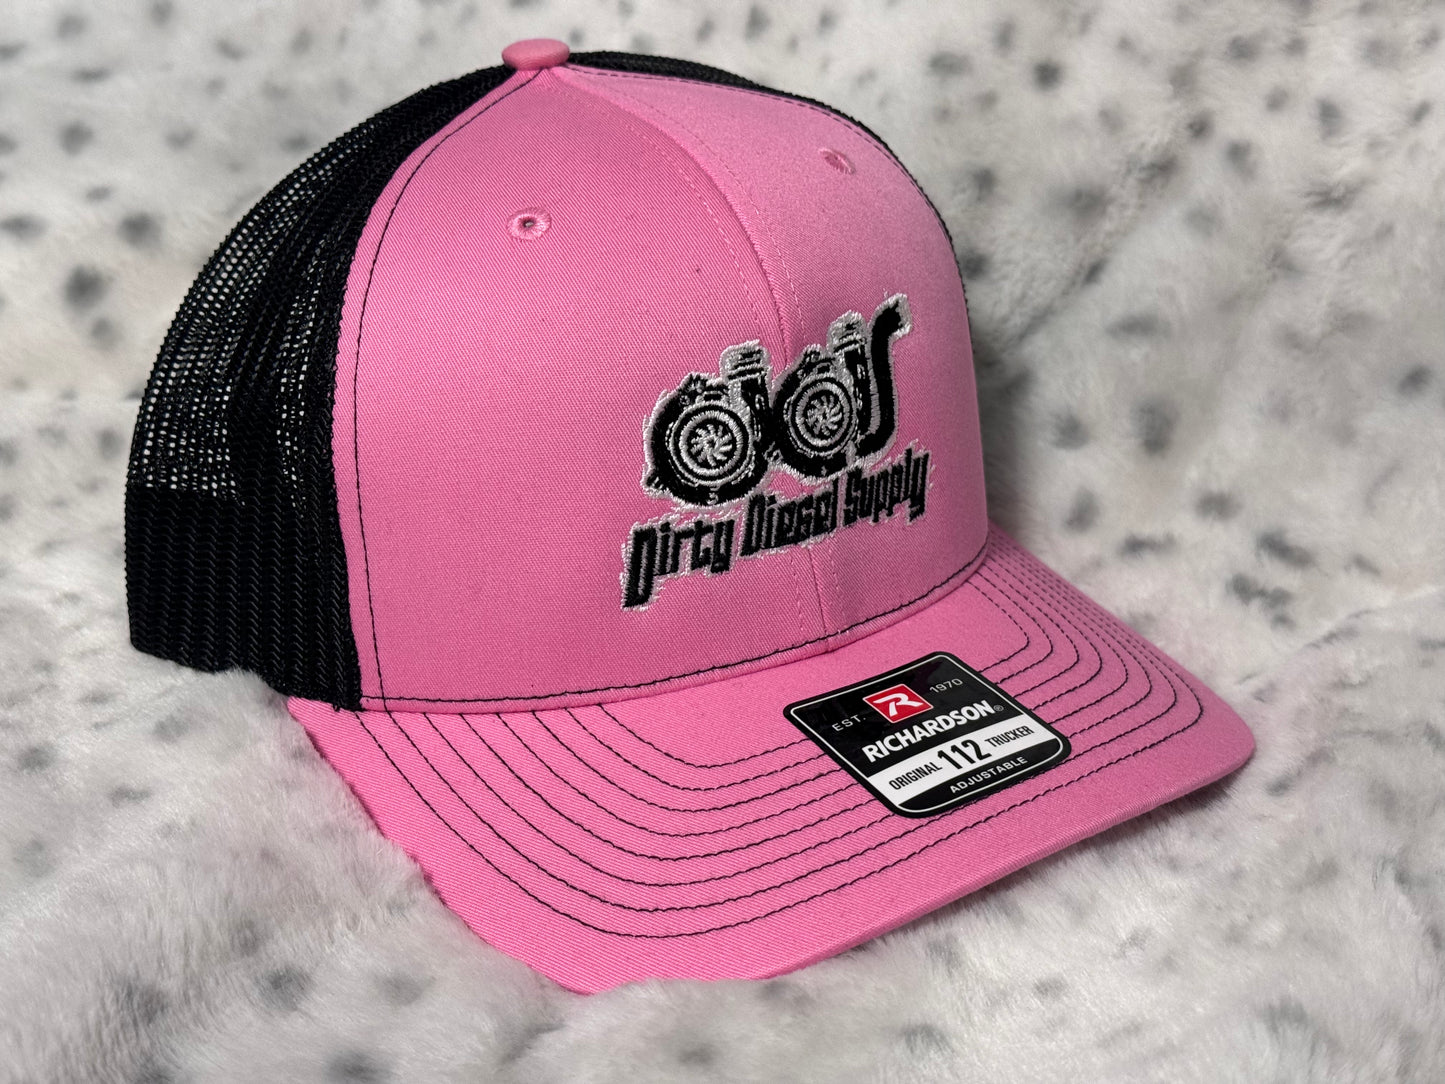 Embroidered Turbo Trucker Hats